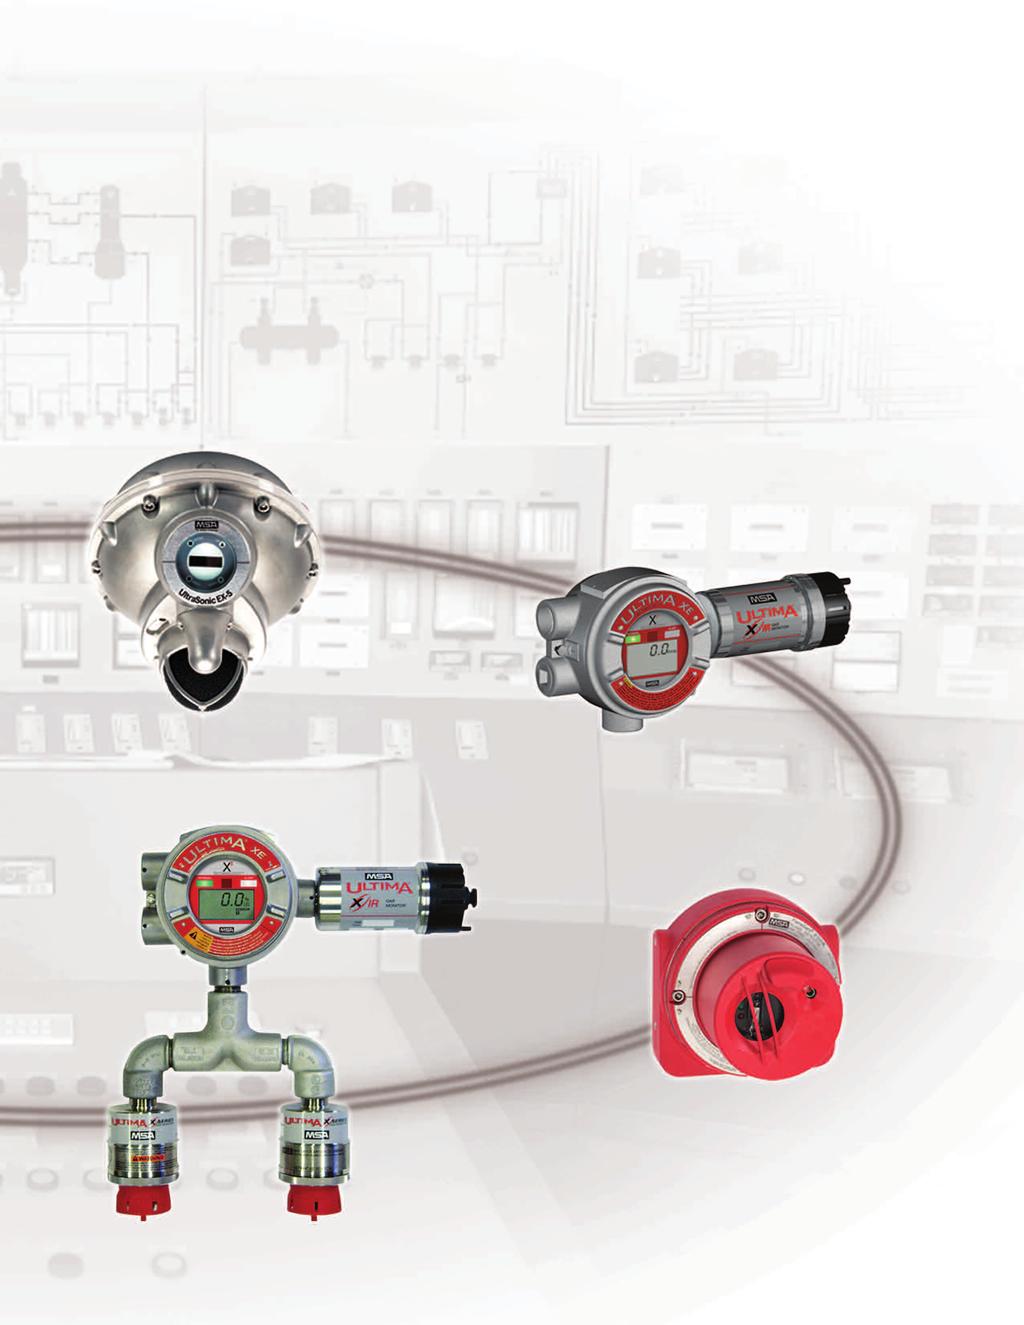 Dedicated to Providing Complete Solutions for Your Gas Detection Needs For nearly a century, MSA has been at the forefront of hundreds of safety innovations, consistently pushing the envelope in ways